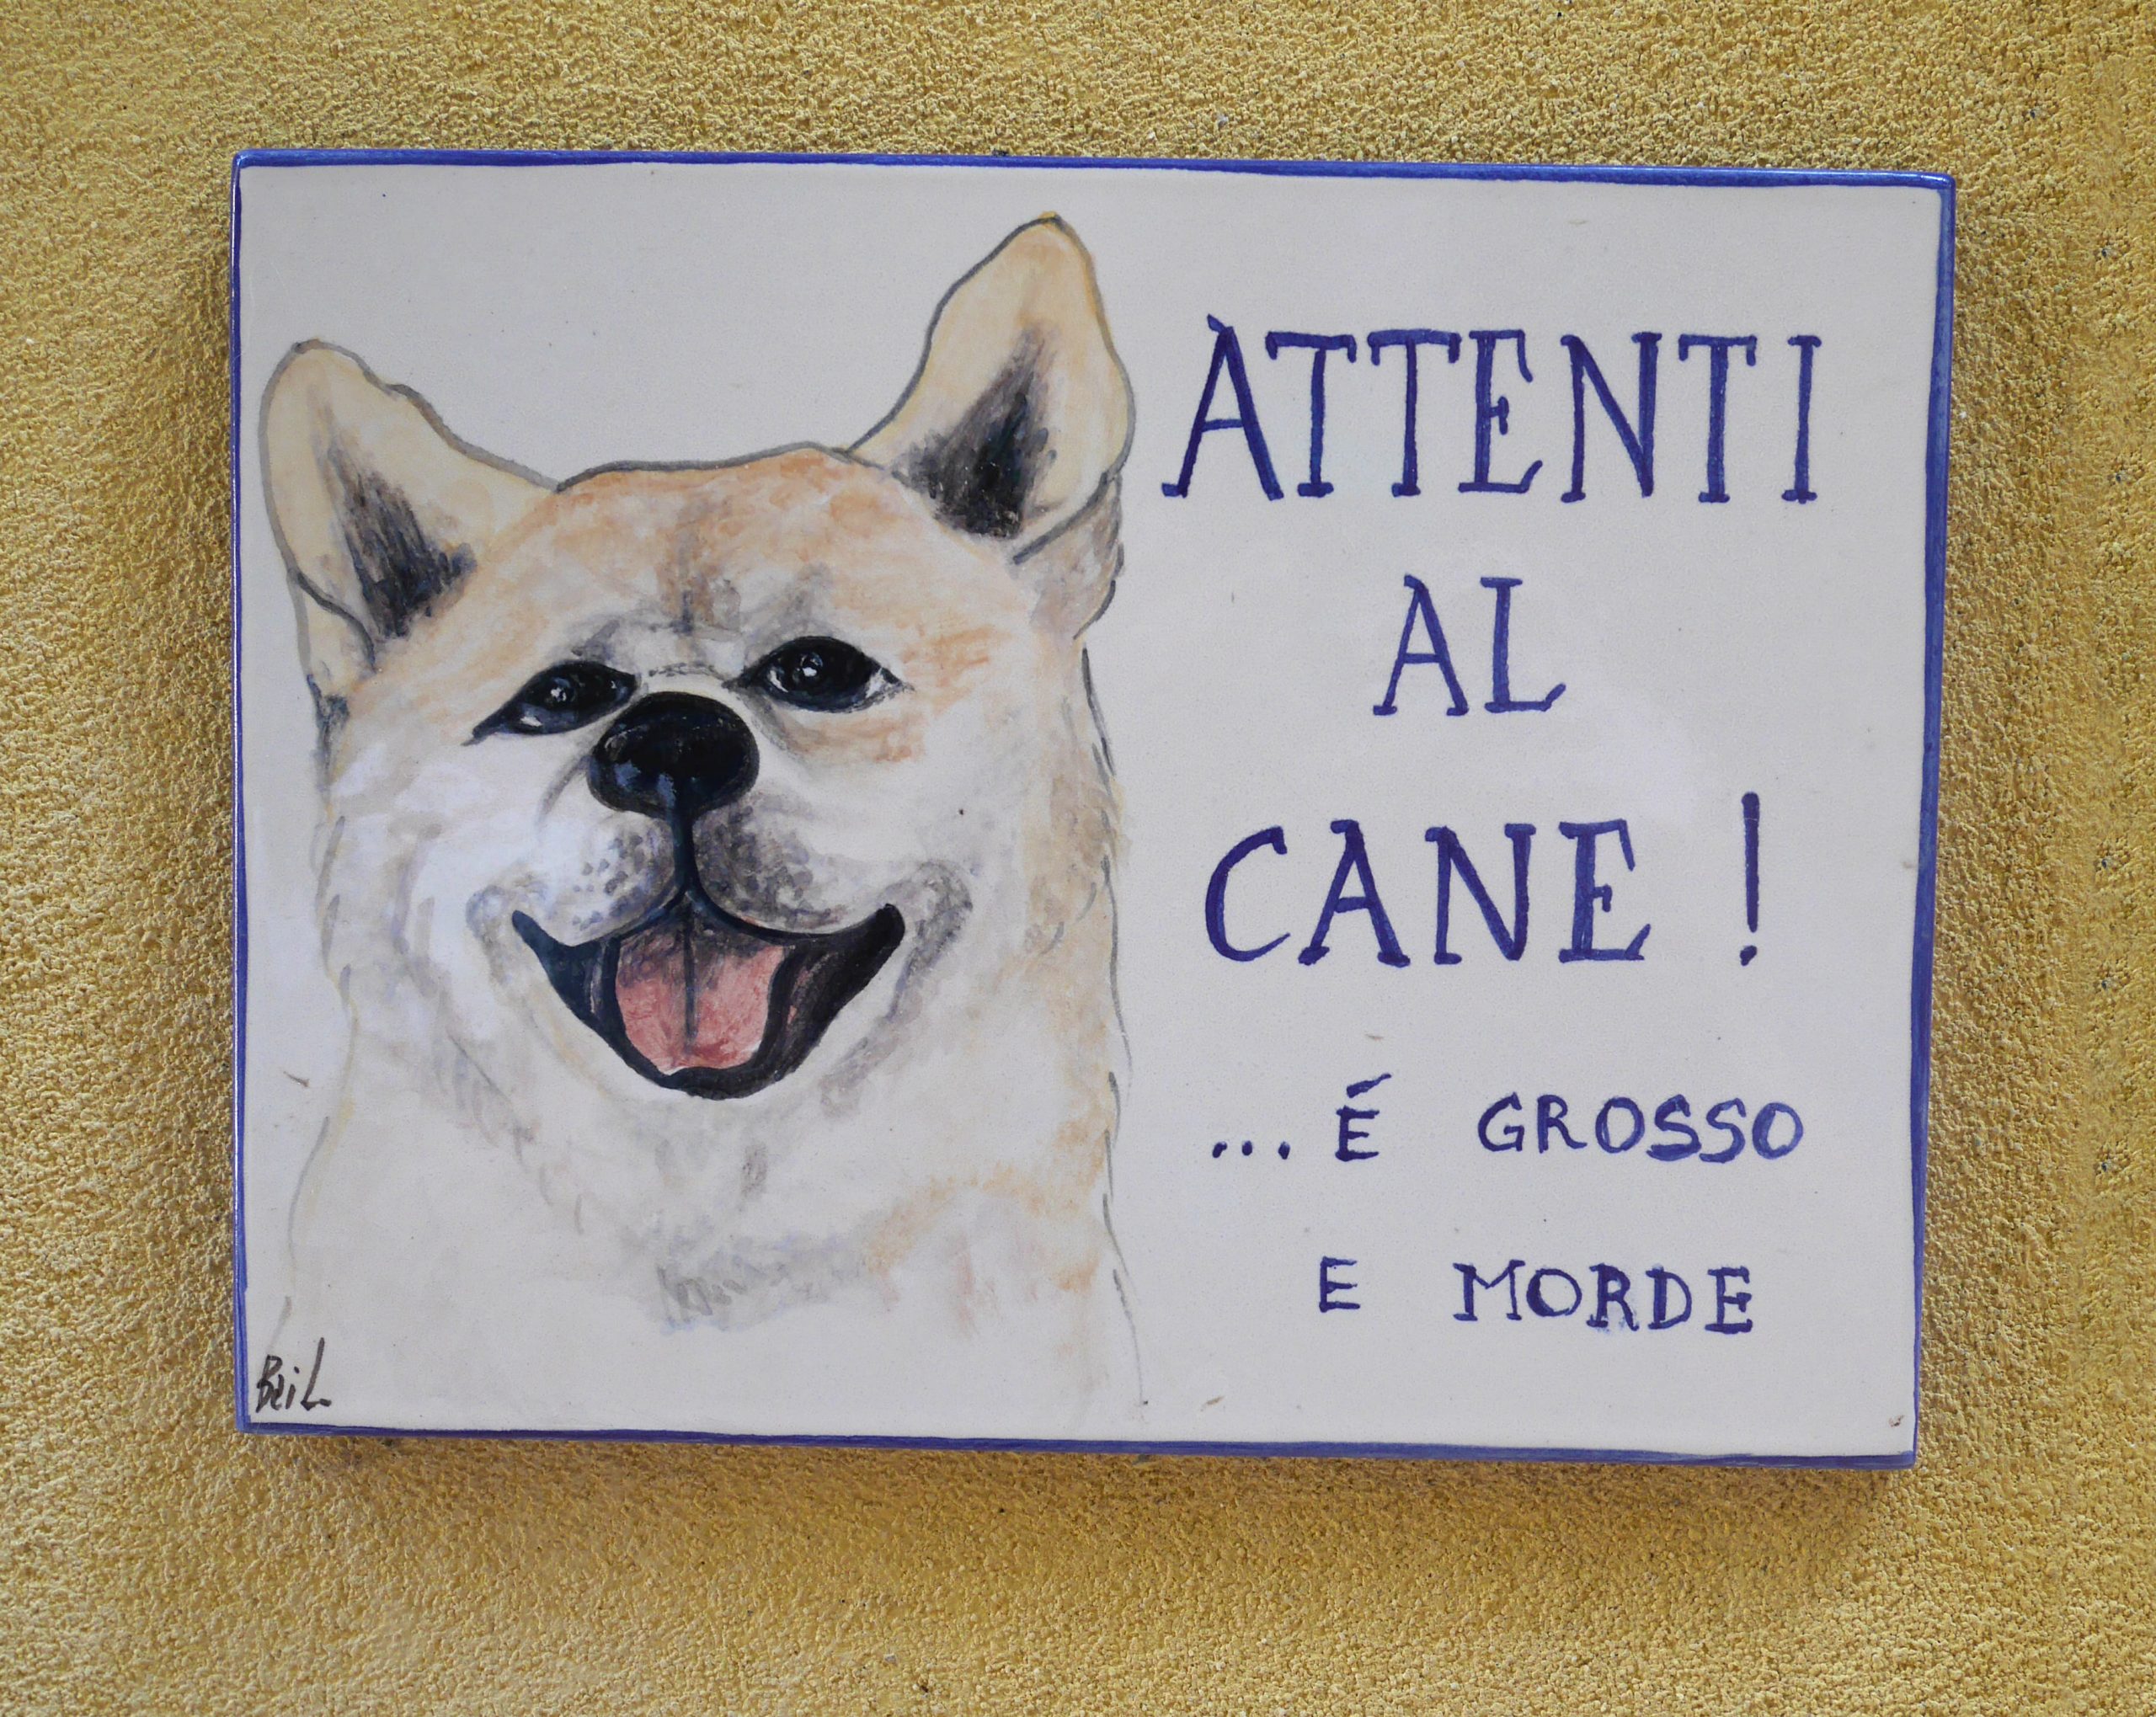 You are currently viewing Attenti al cane